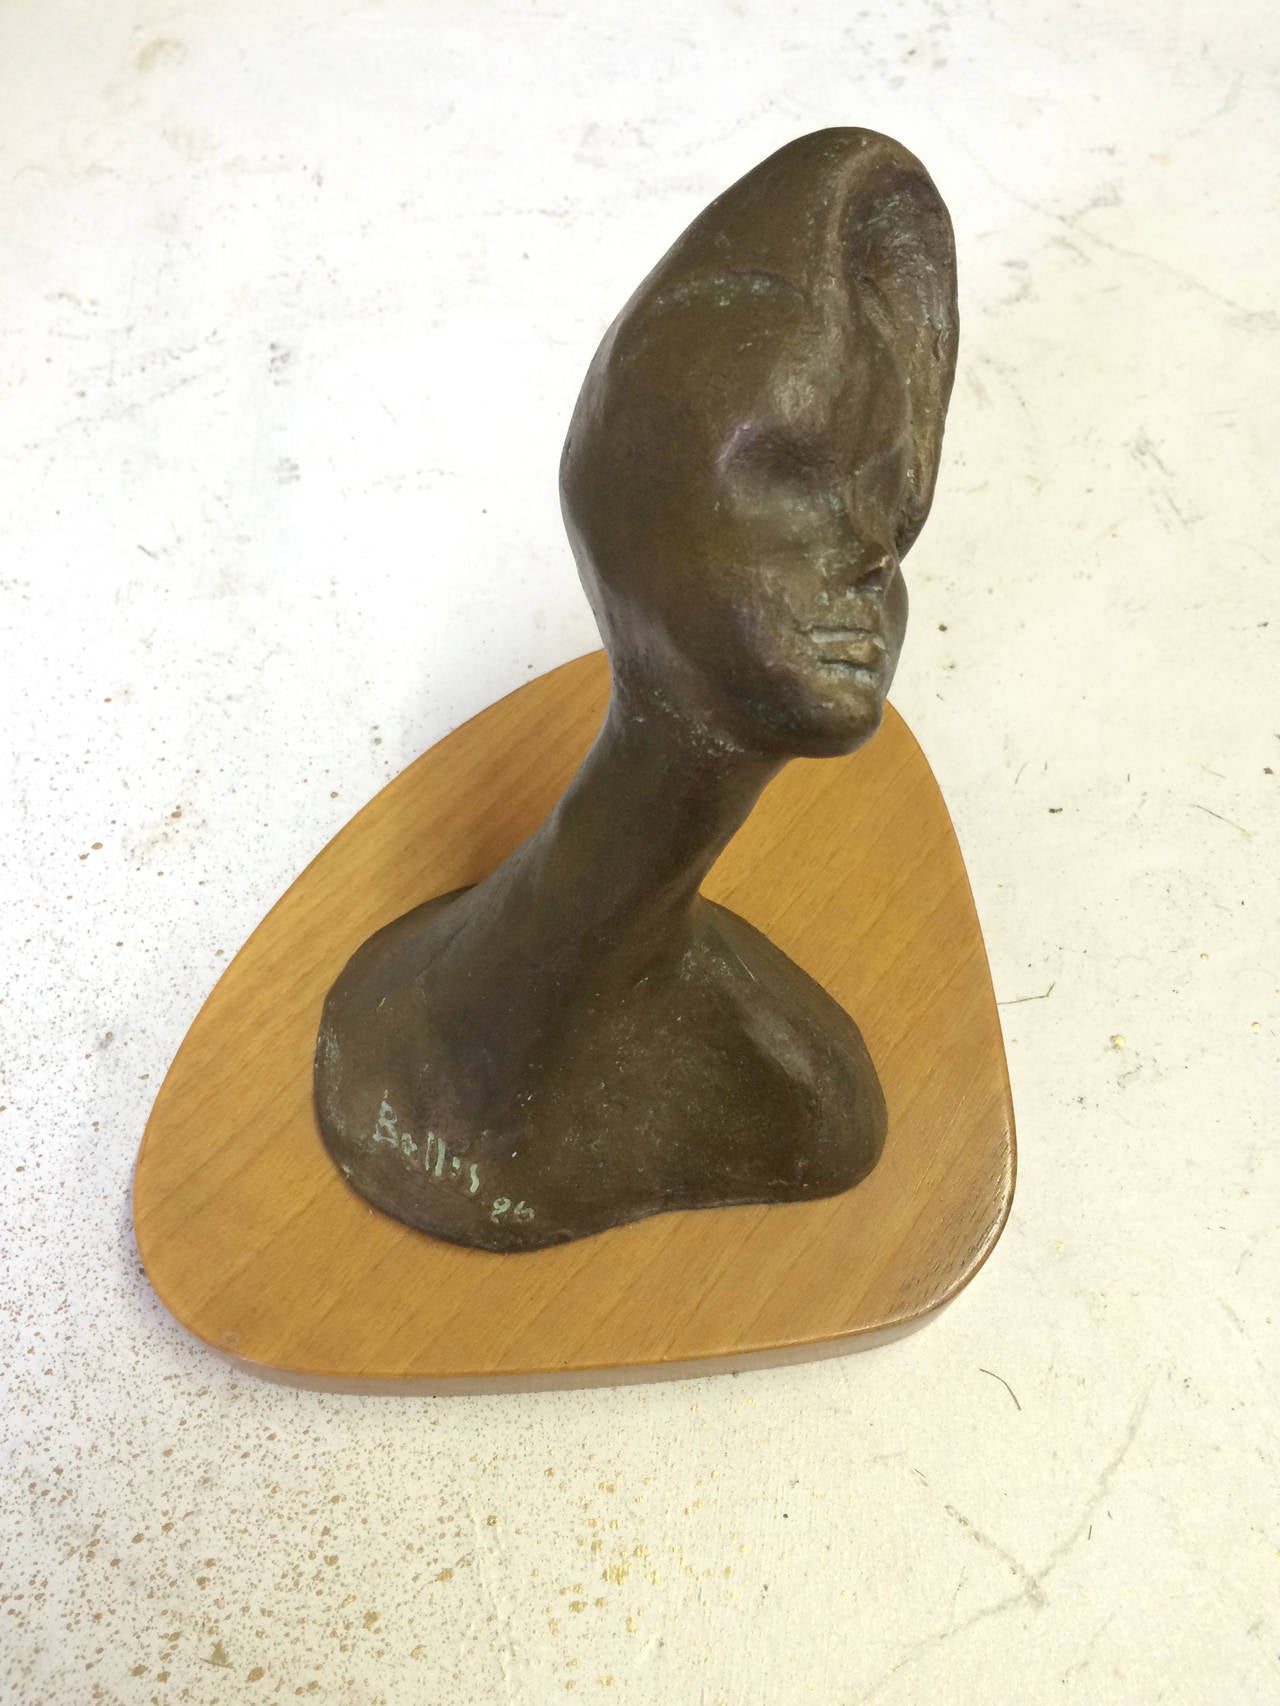 This sculpture of a woman's head with a giraffe-like neck is mounted on a slab of wood and is signed 